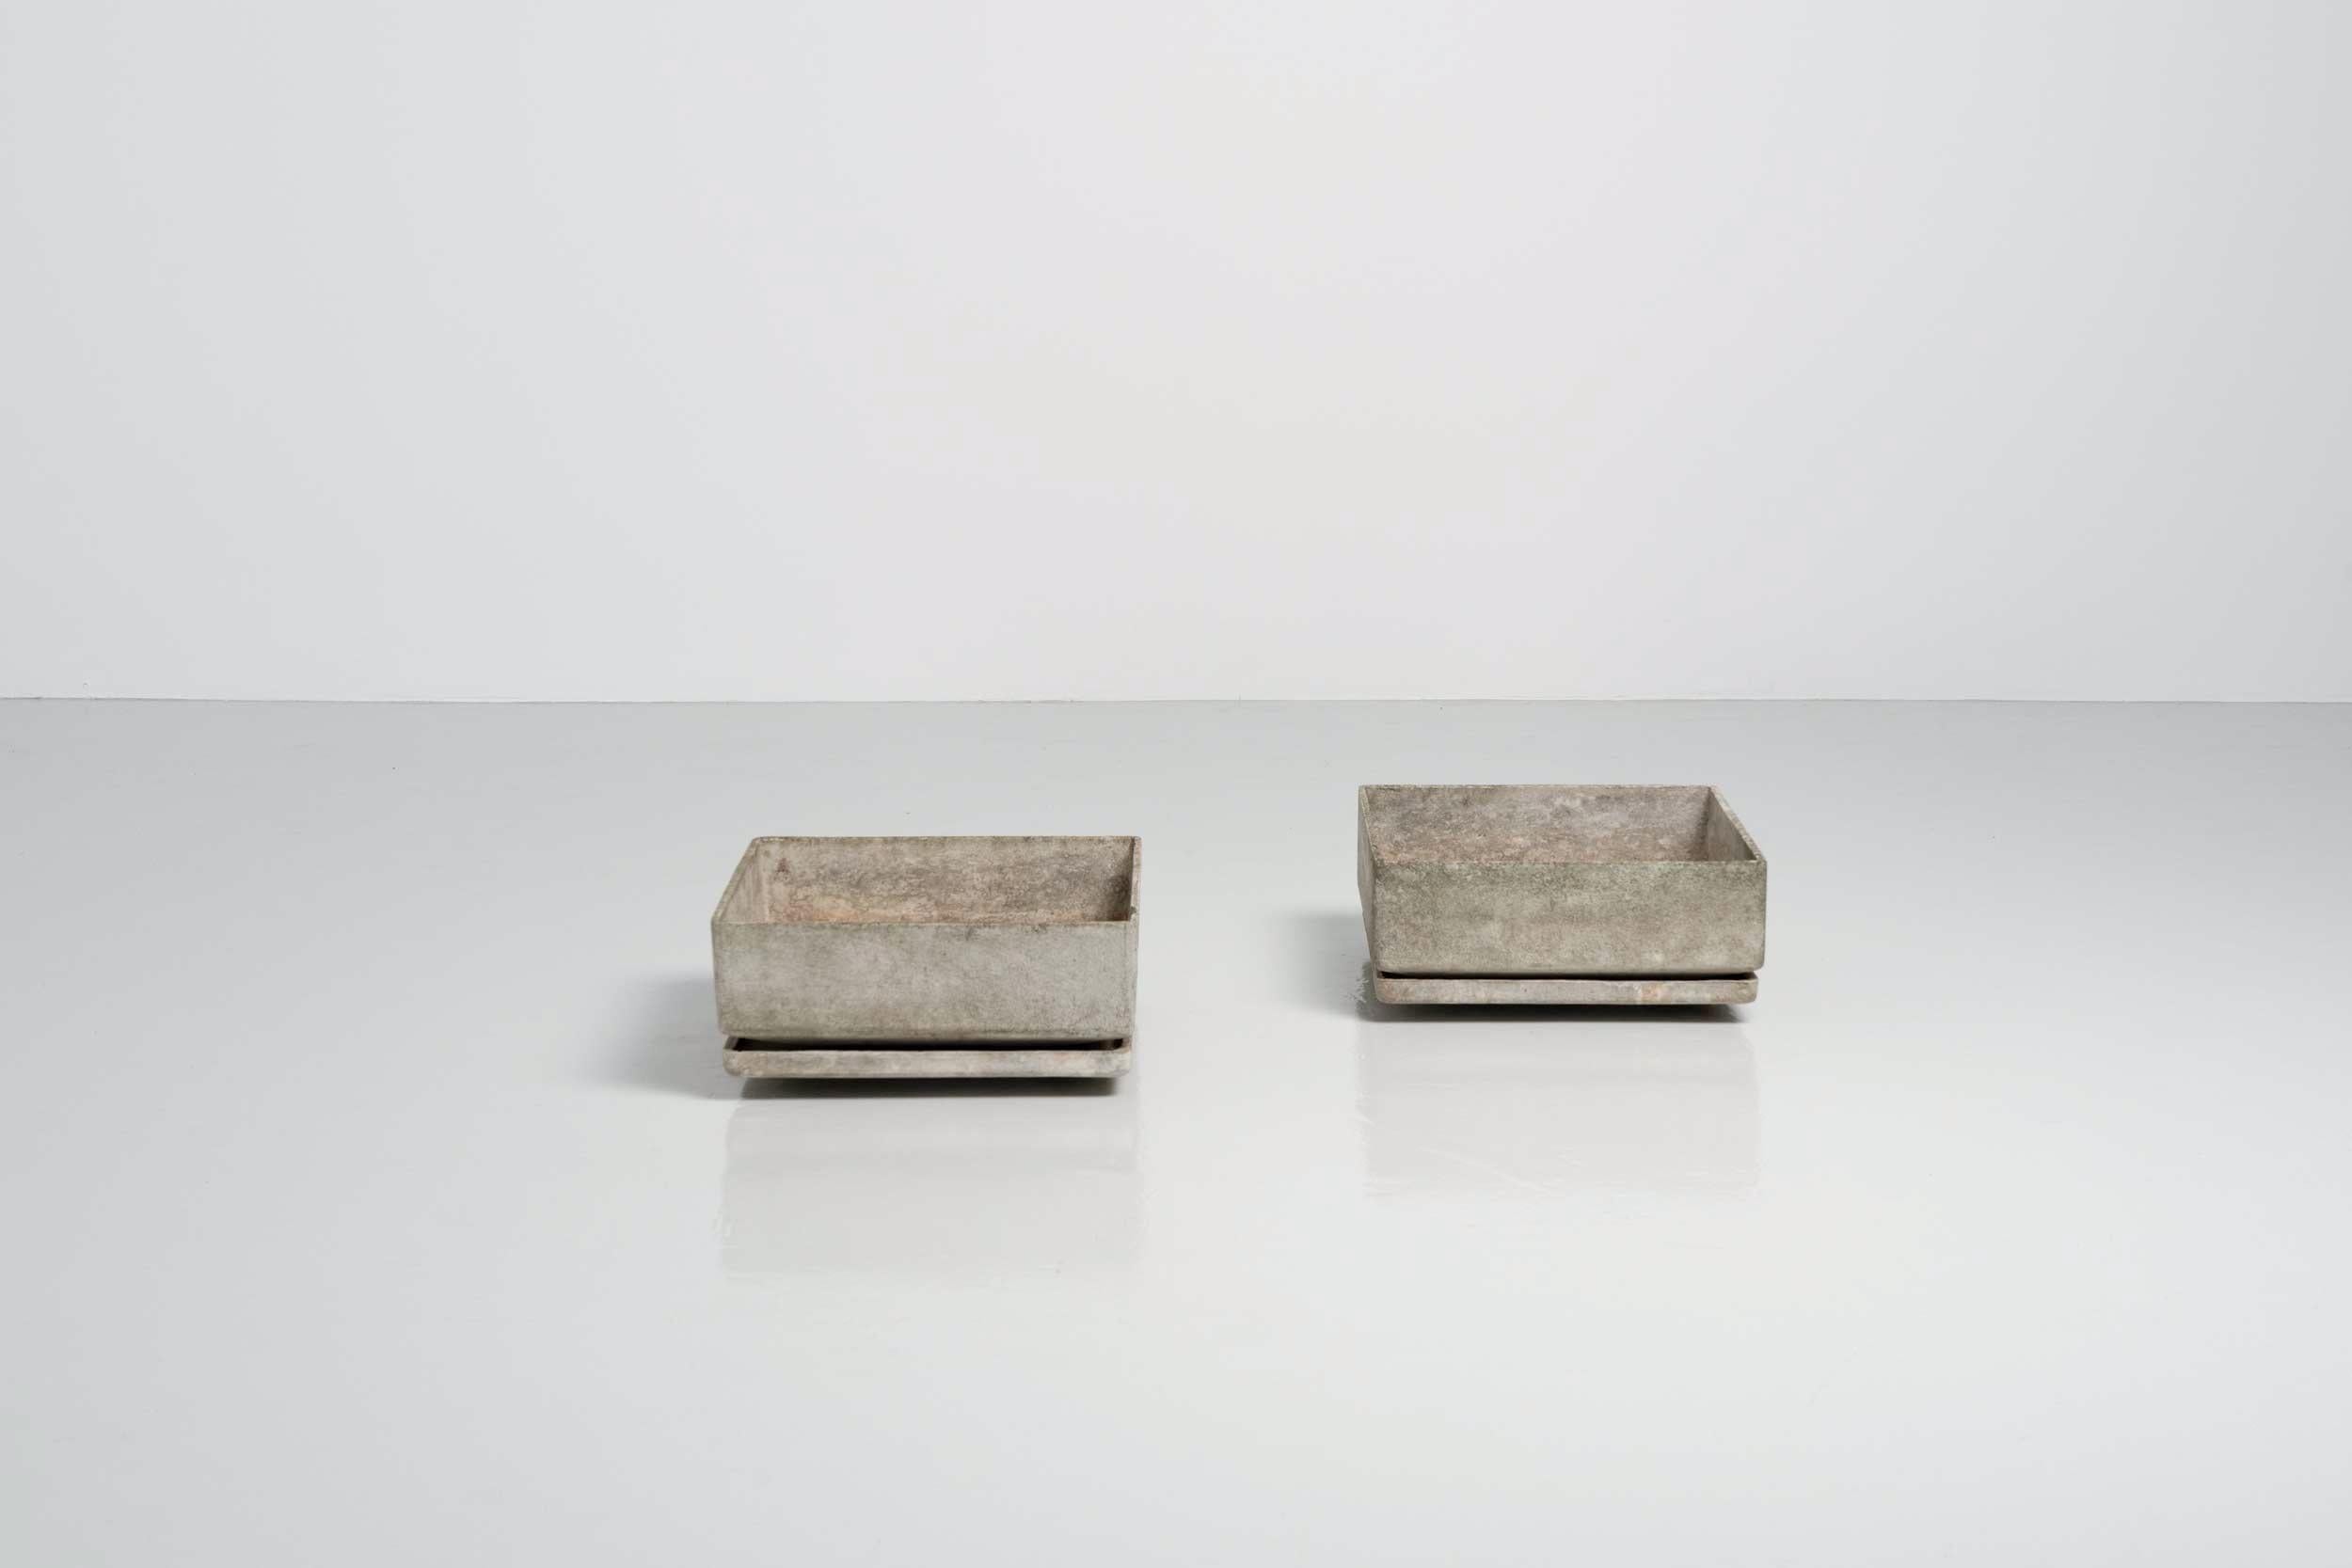 Very nice pair of square planters designed by Bruno Rey and manufactured by Eternit AG, Switzerland 1960. These square shaped planters have a bowl underneath which is very nice. These planters are made of cellulose infused fiber cement. They have a